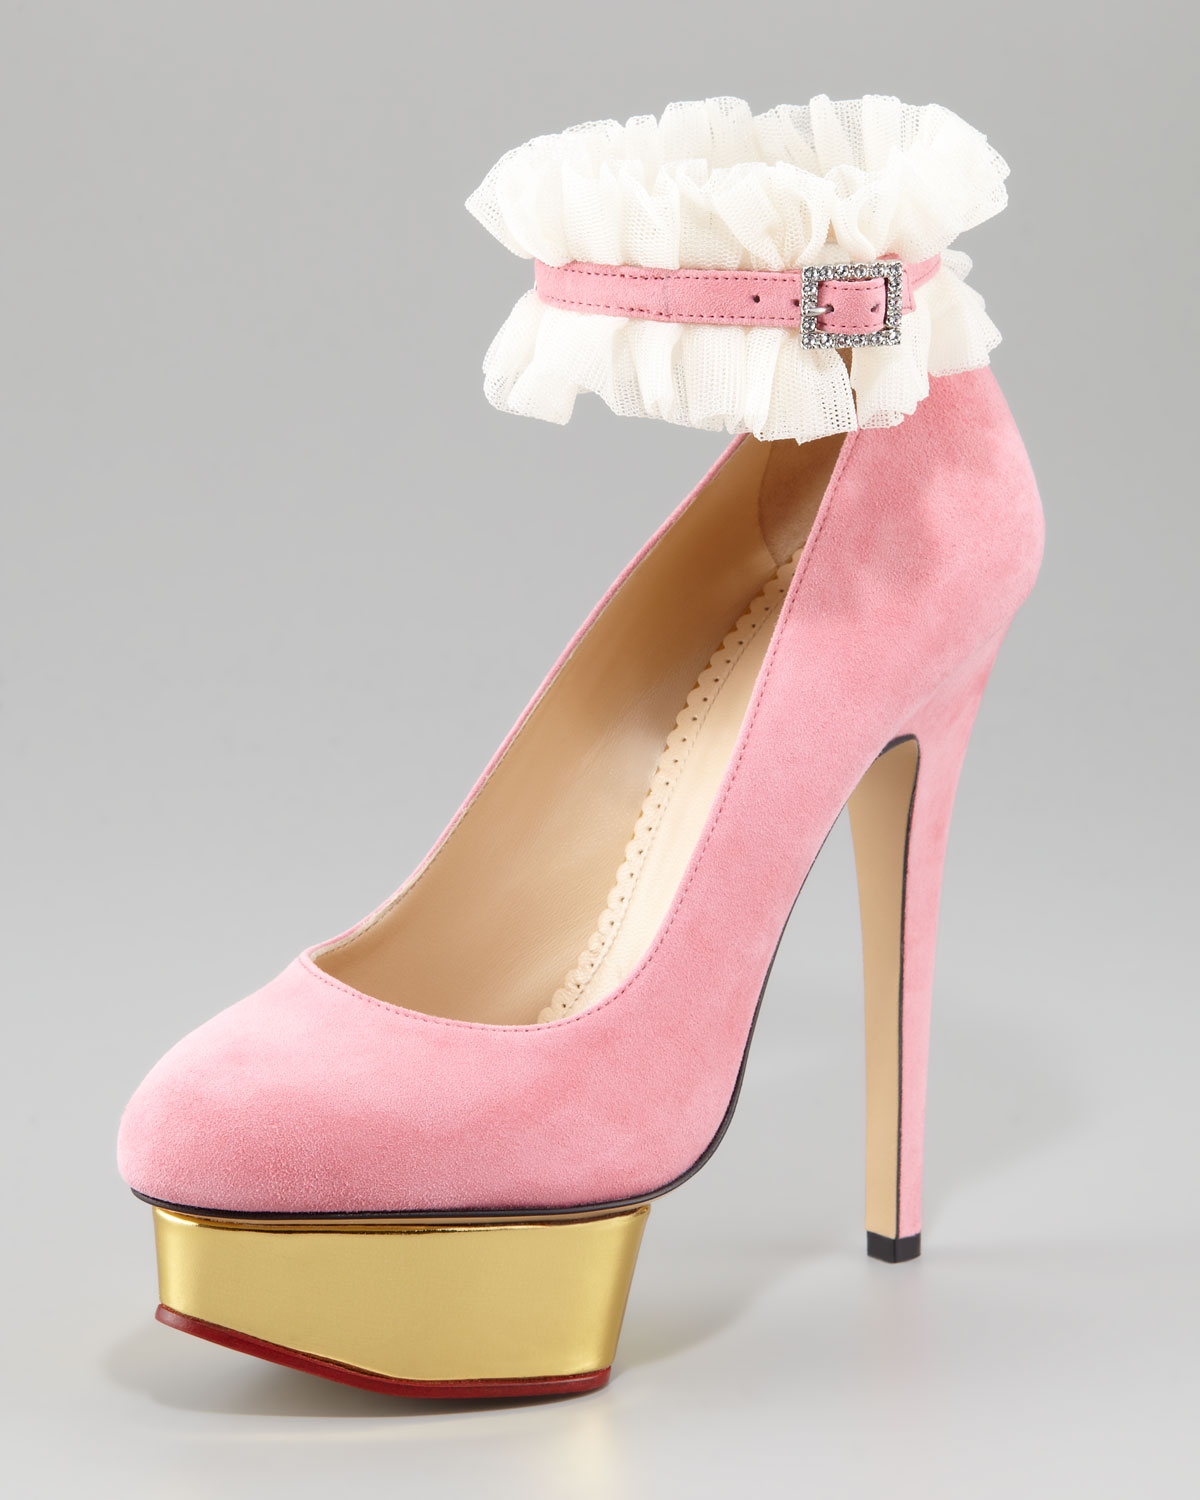 Lyst - Charlotte Olympia Dolly Island Suede Platform Pump Light Pink in ...